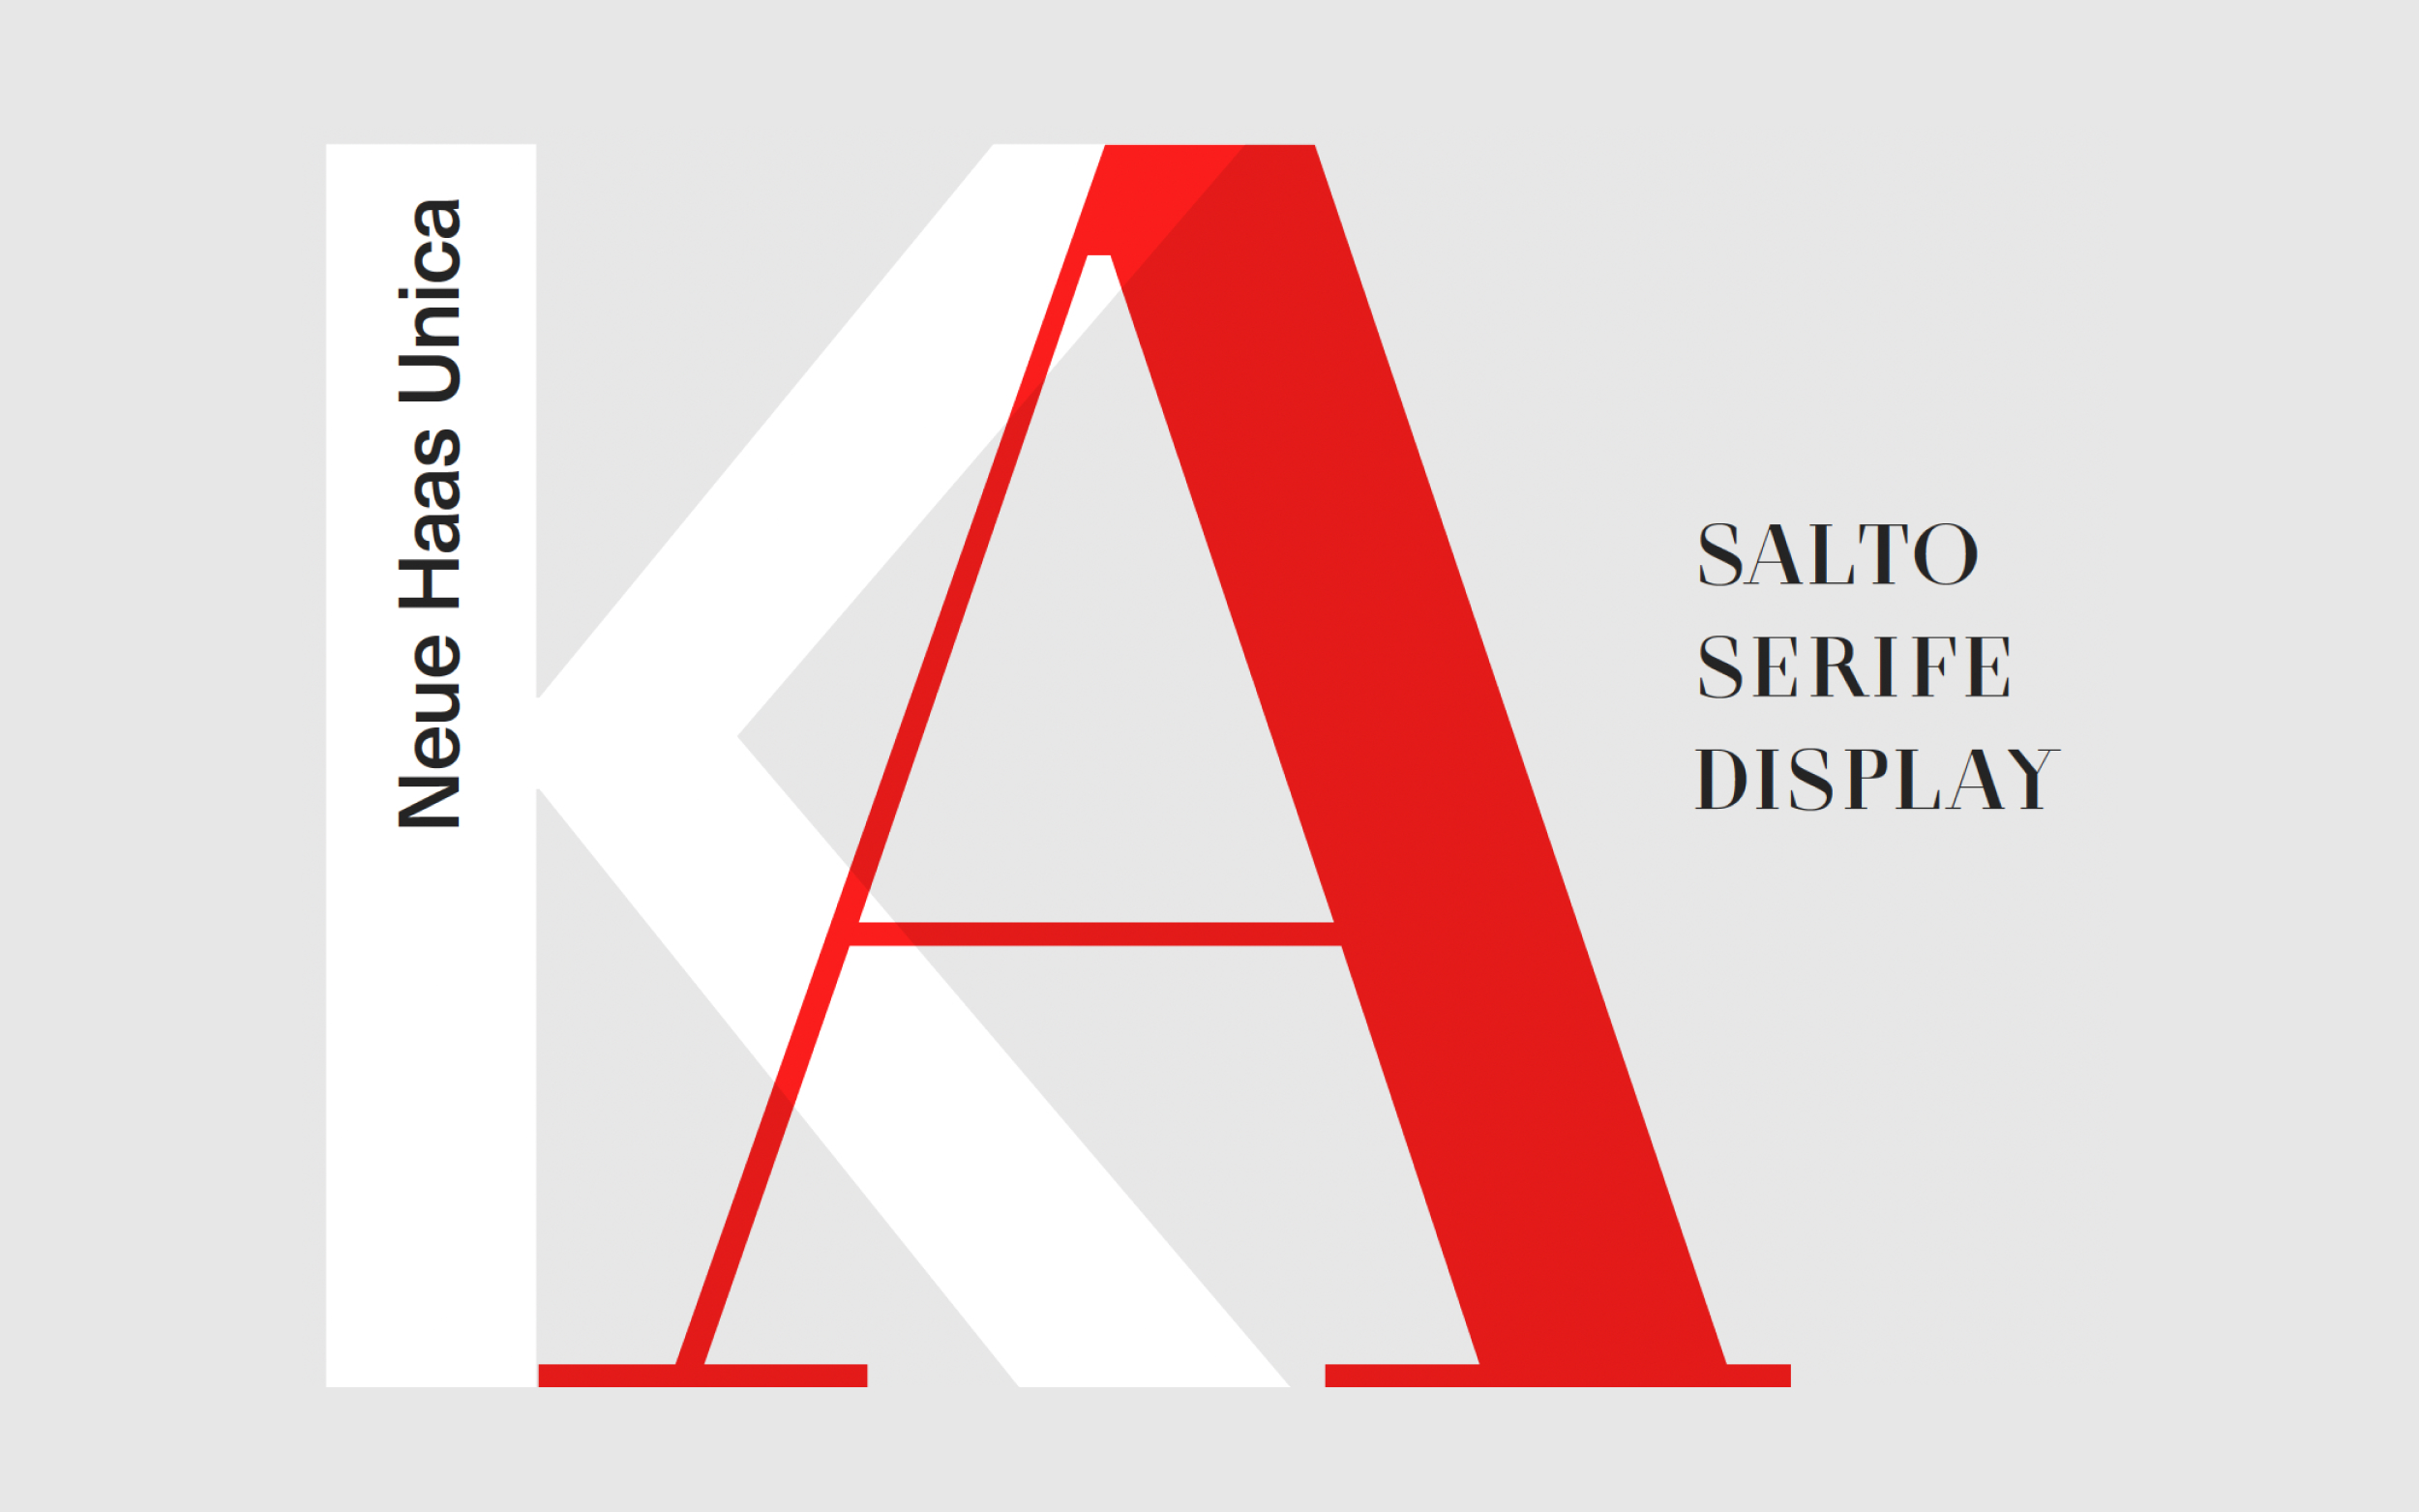 The capital letter K is shown in the font Haas Unica, next to it a capital A is shown in the font Salto Serife display.